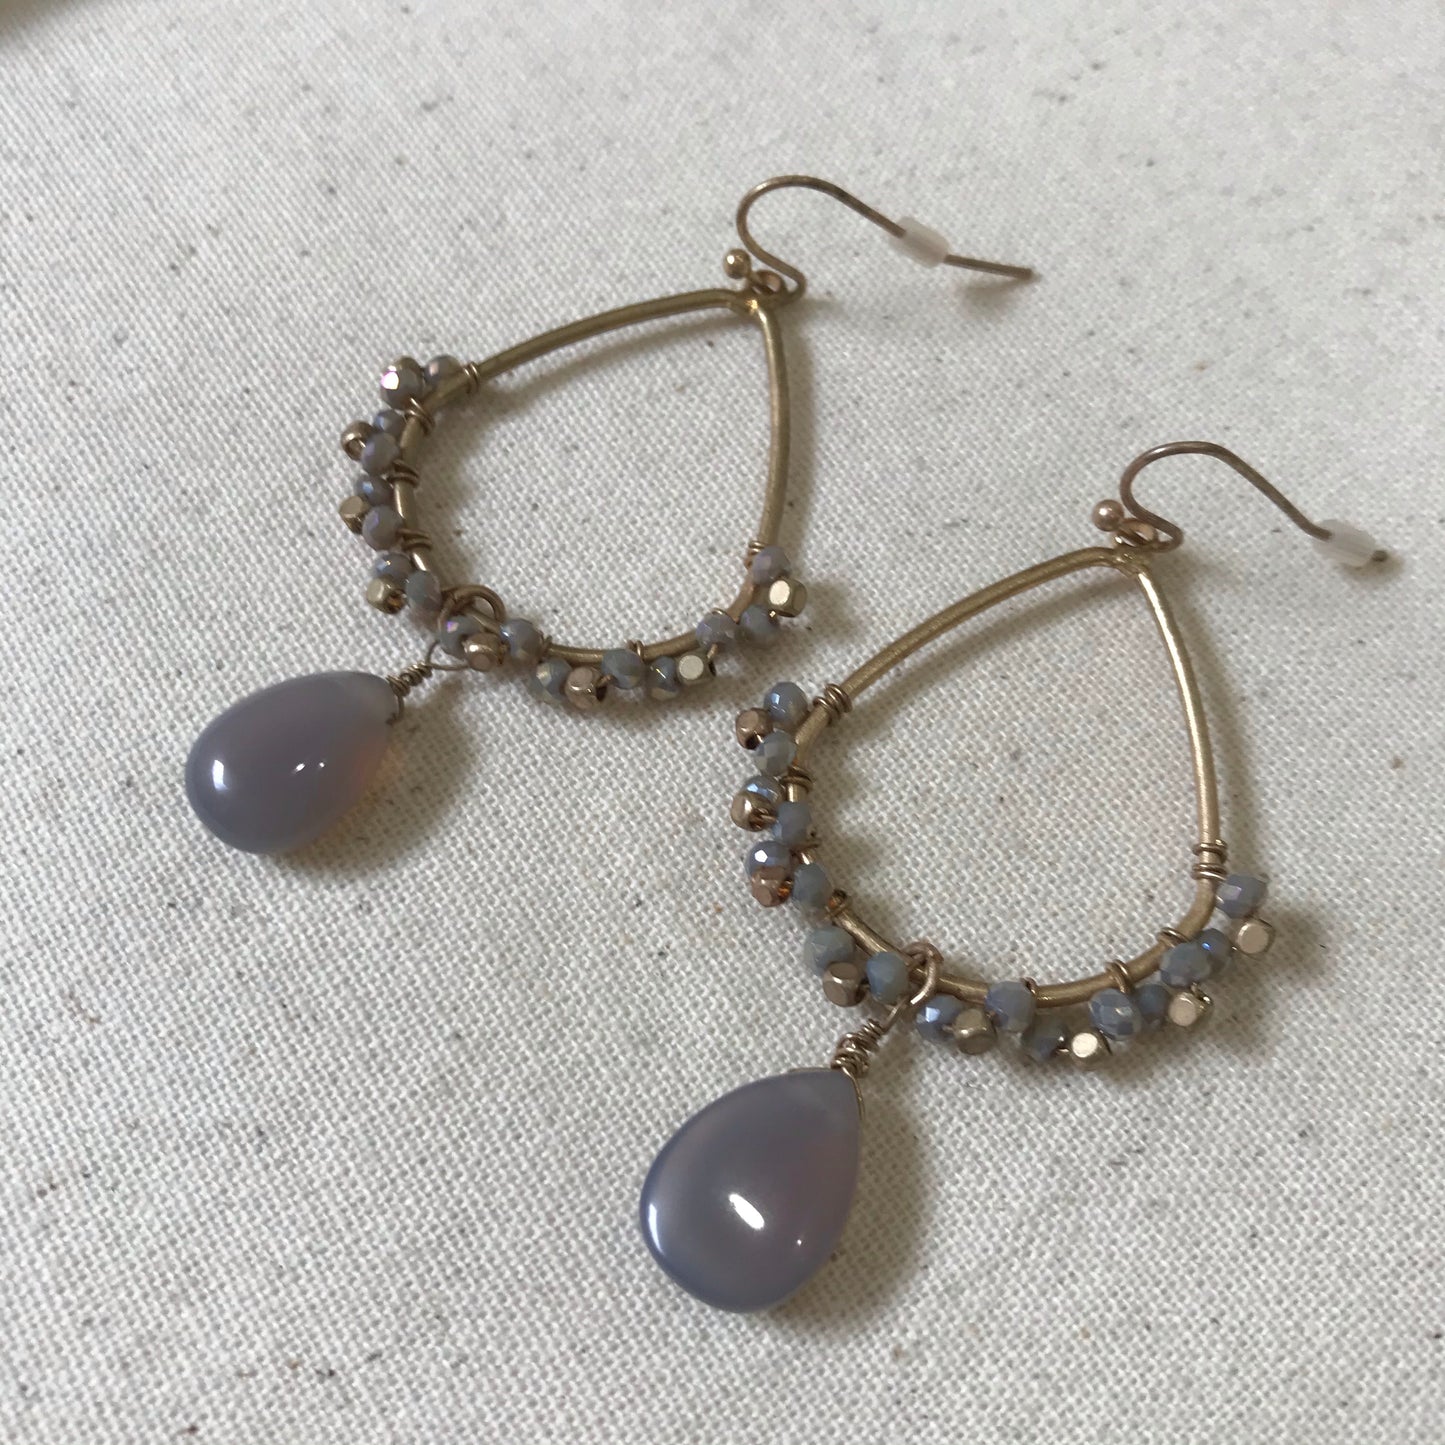 Gold tear drop earrings with grey beads